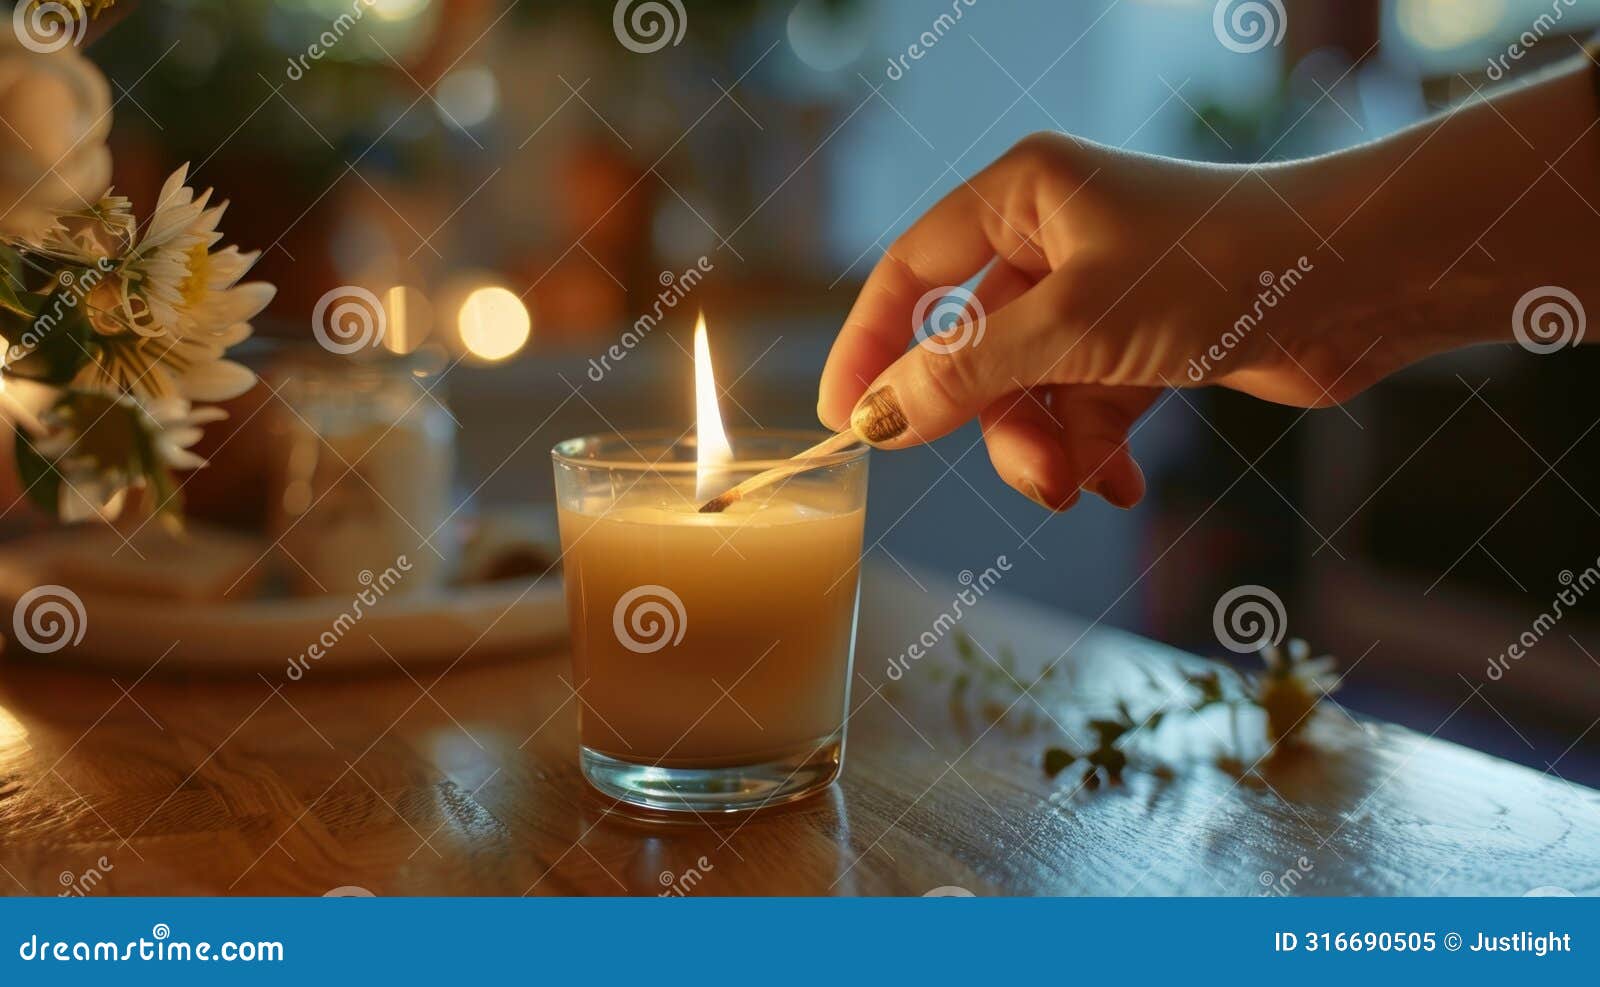 a hand holding a match ready to light the candles and start an evening of relaxation indulgence and selfcare